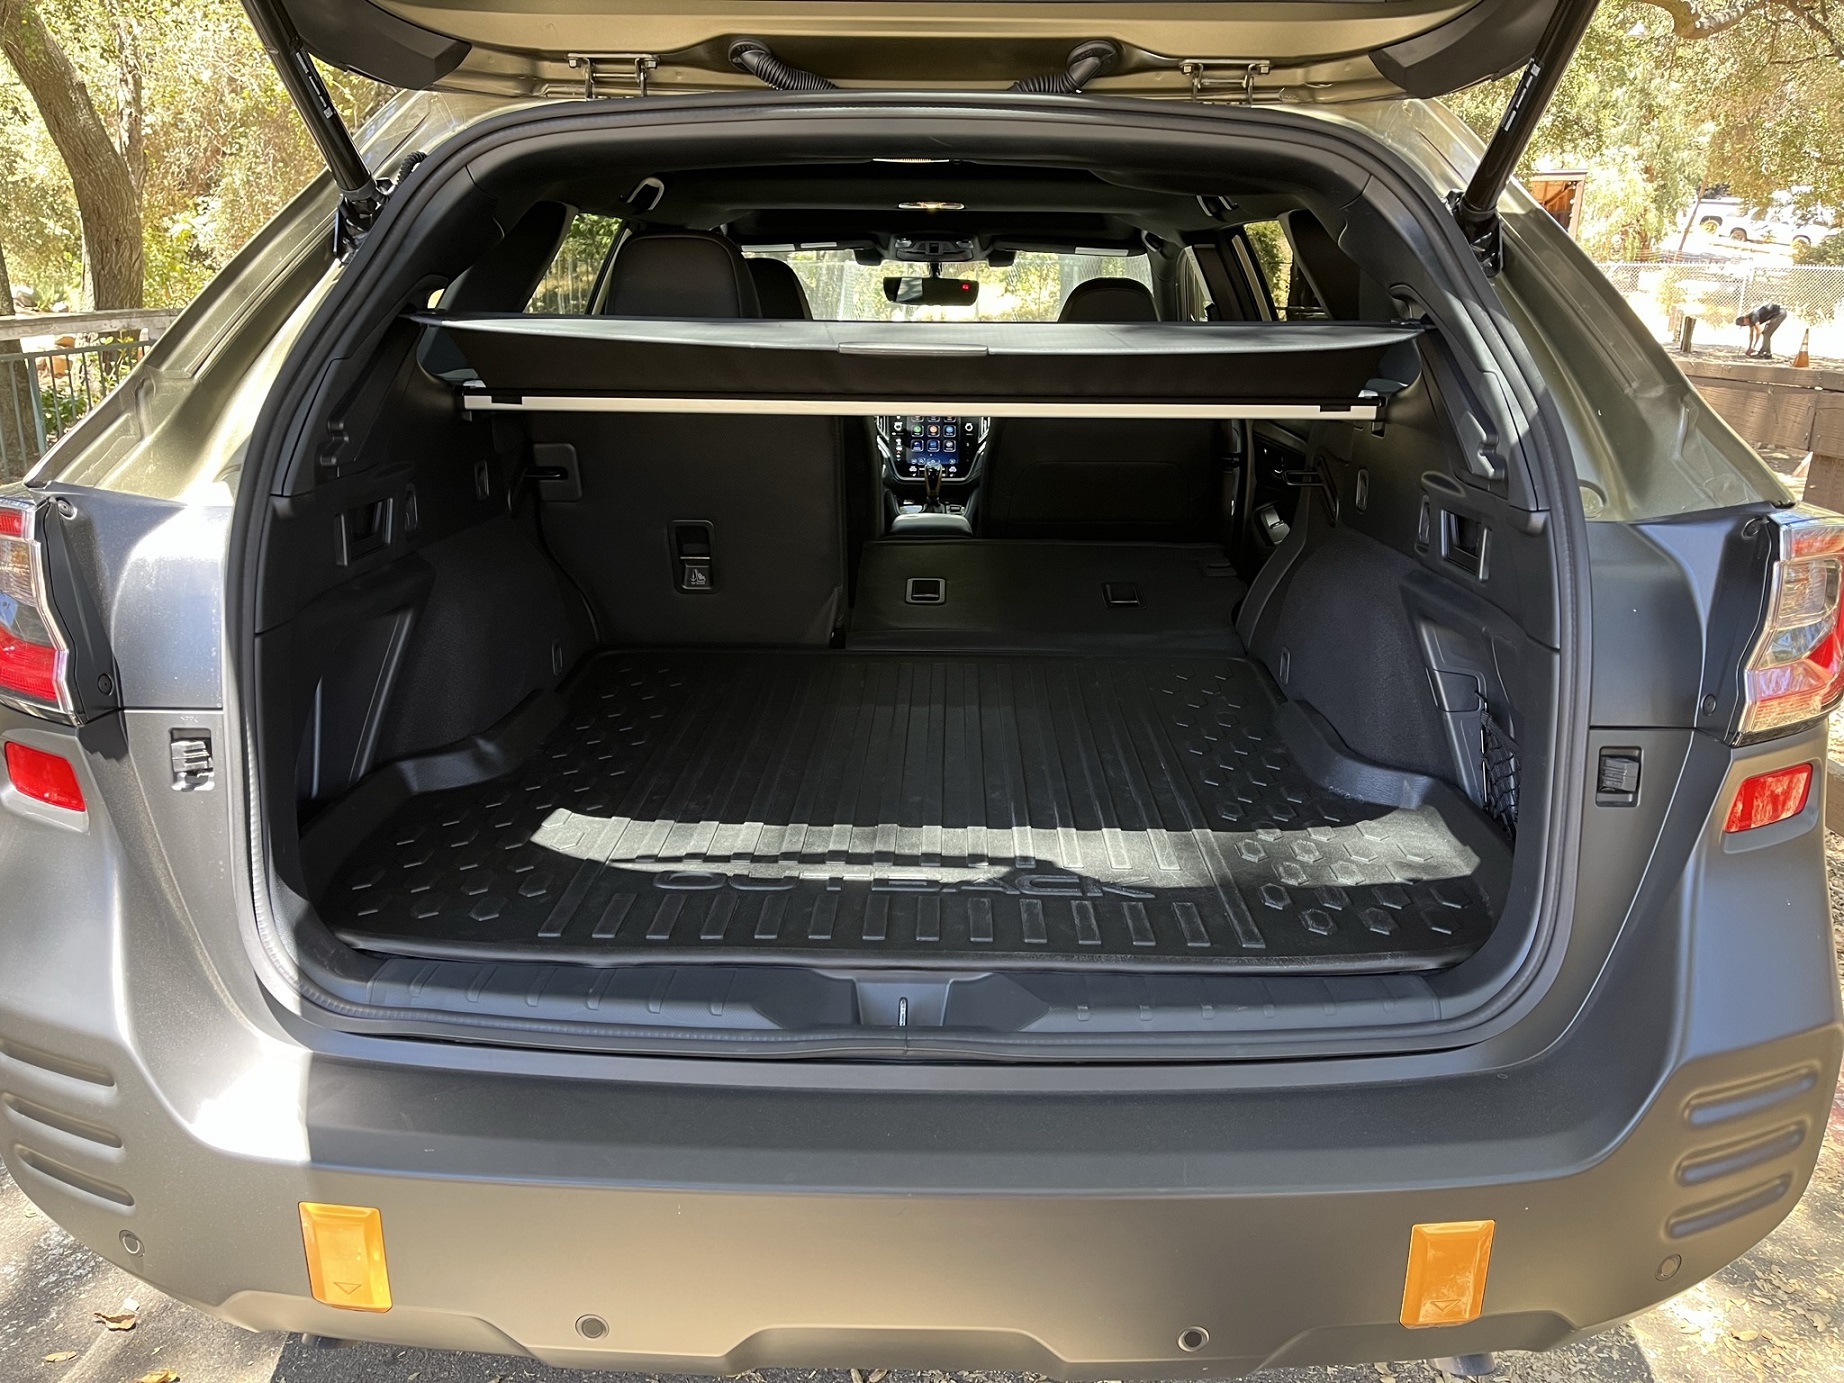 Fold the seatbacks for up to almost 7 feet of length, which means car camping is very doable.